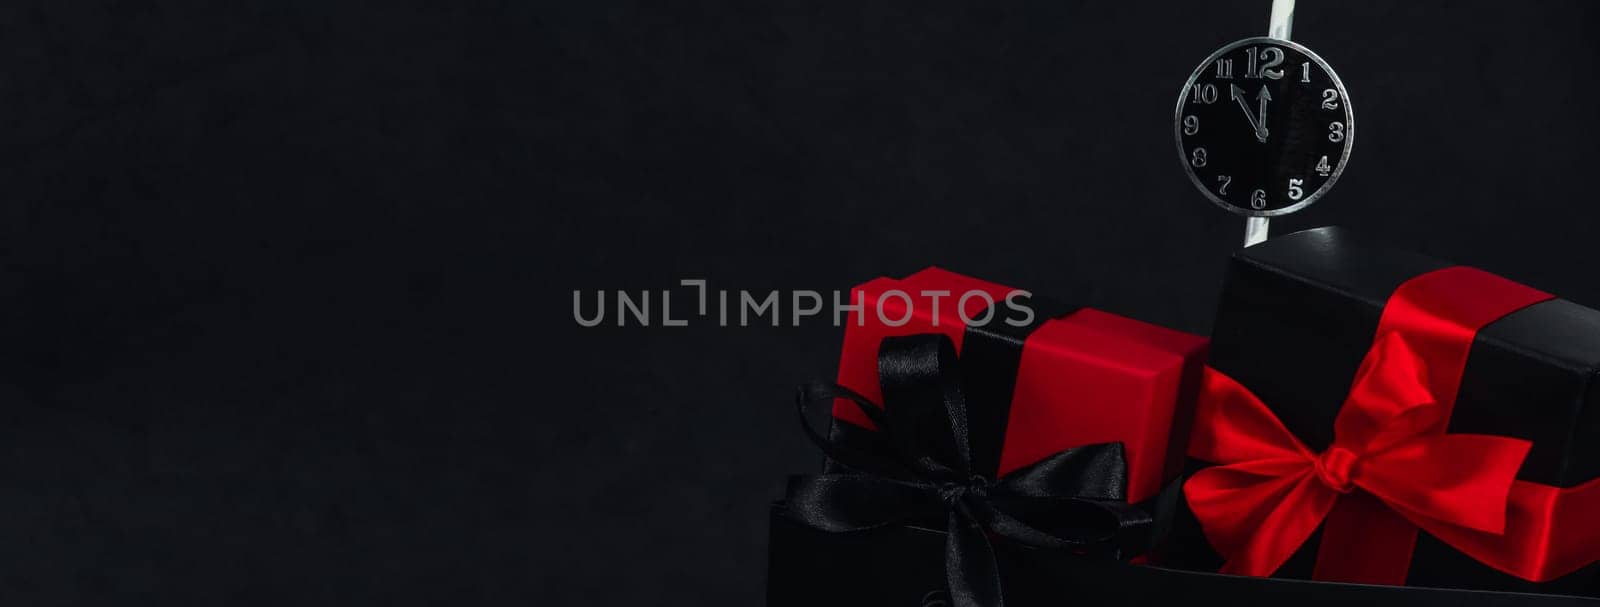 One package with two gift boxes and a paper clock on the right against a black background with space for text on the left, close-up side view. Christmas and black friday concept.